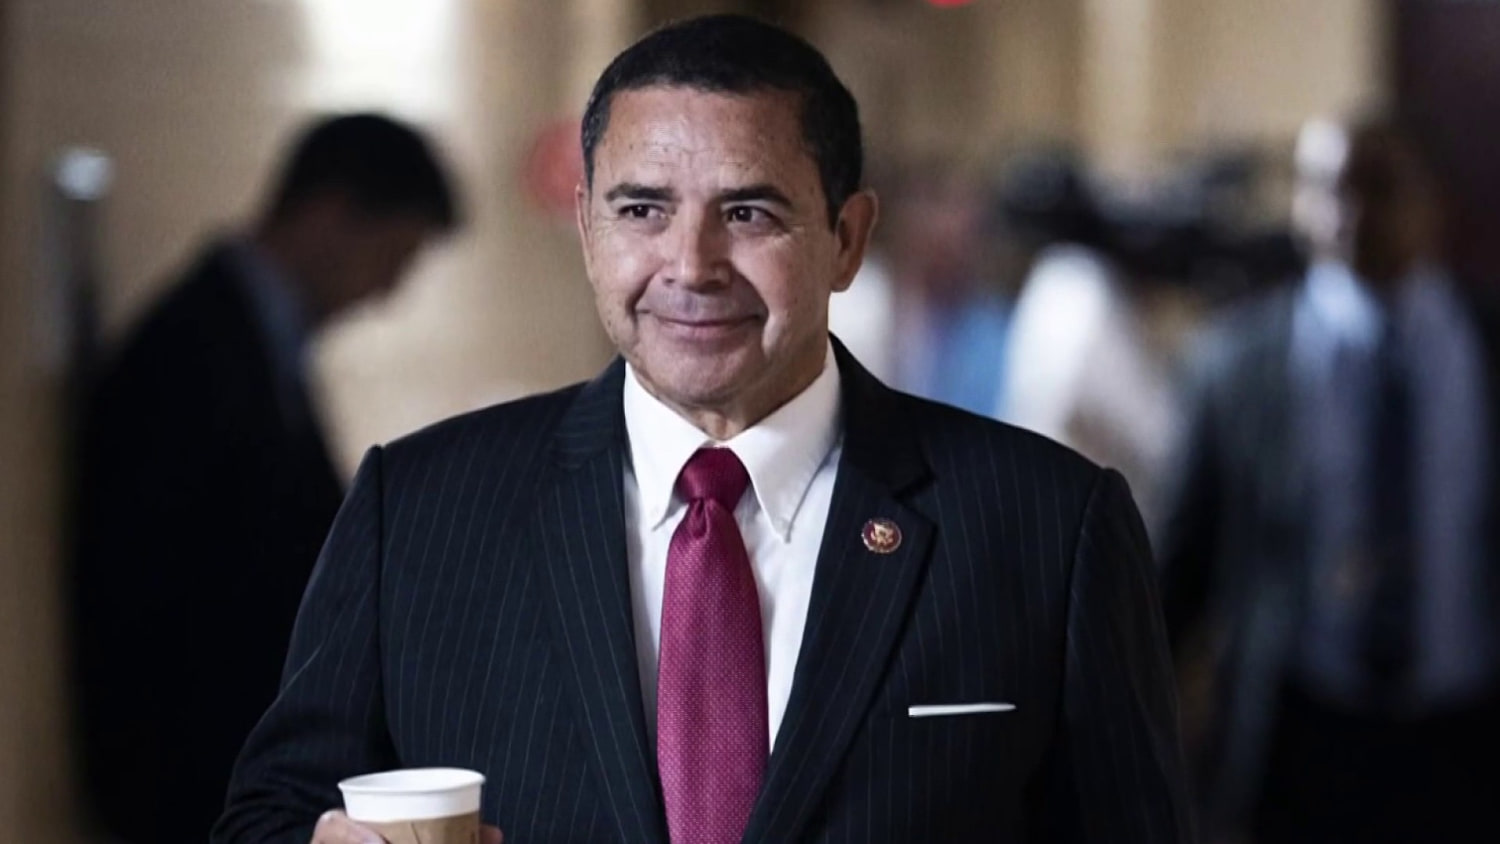 Democratic Rep. Henry Cuellar indicted on bribery charges